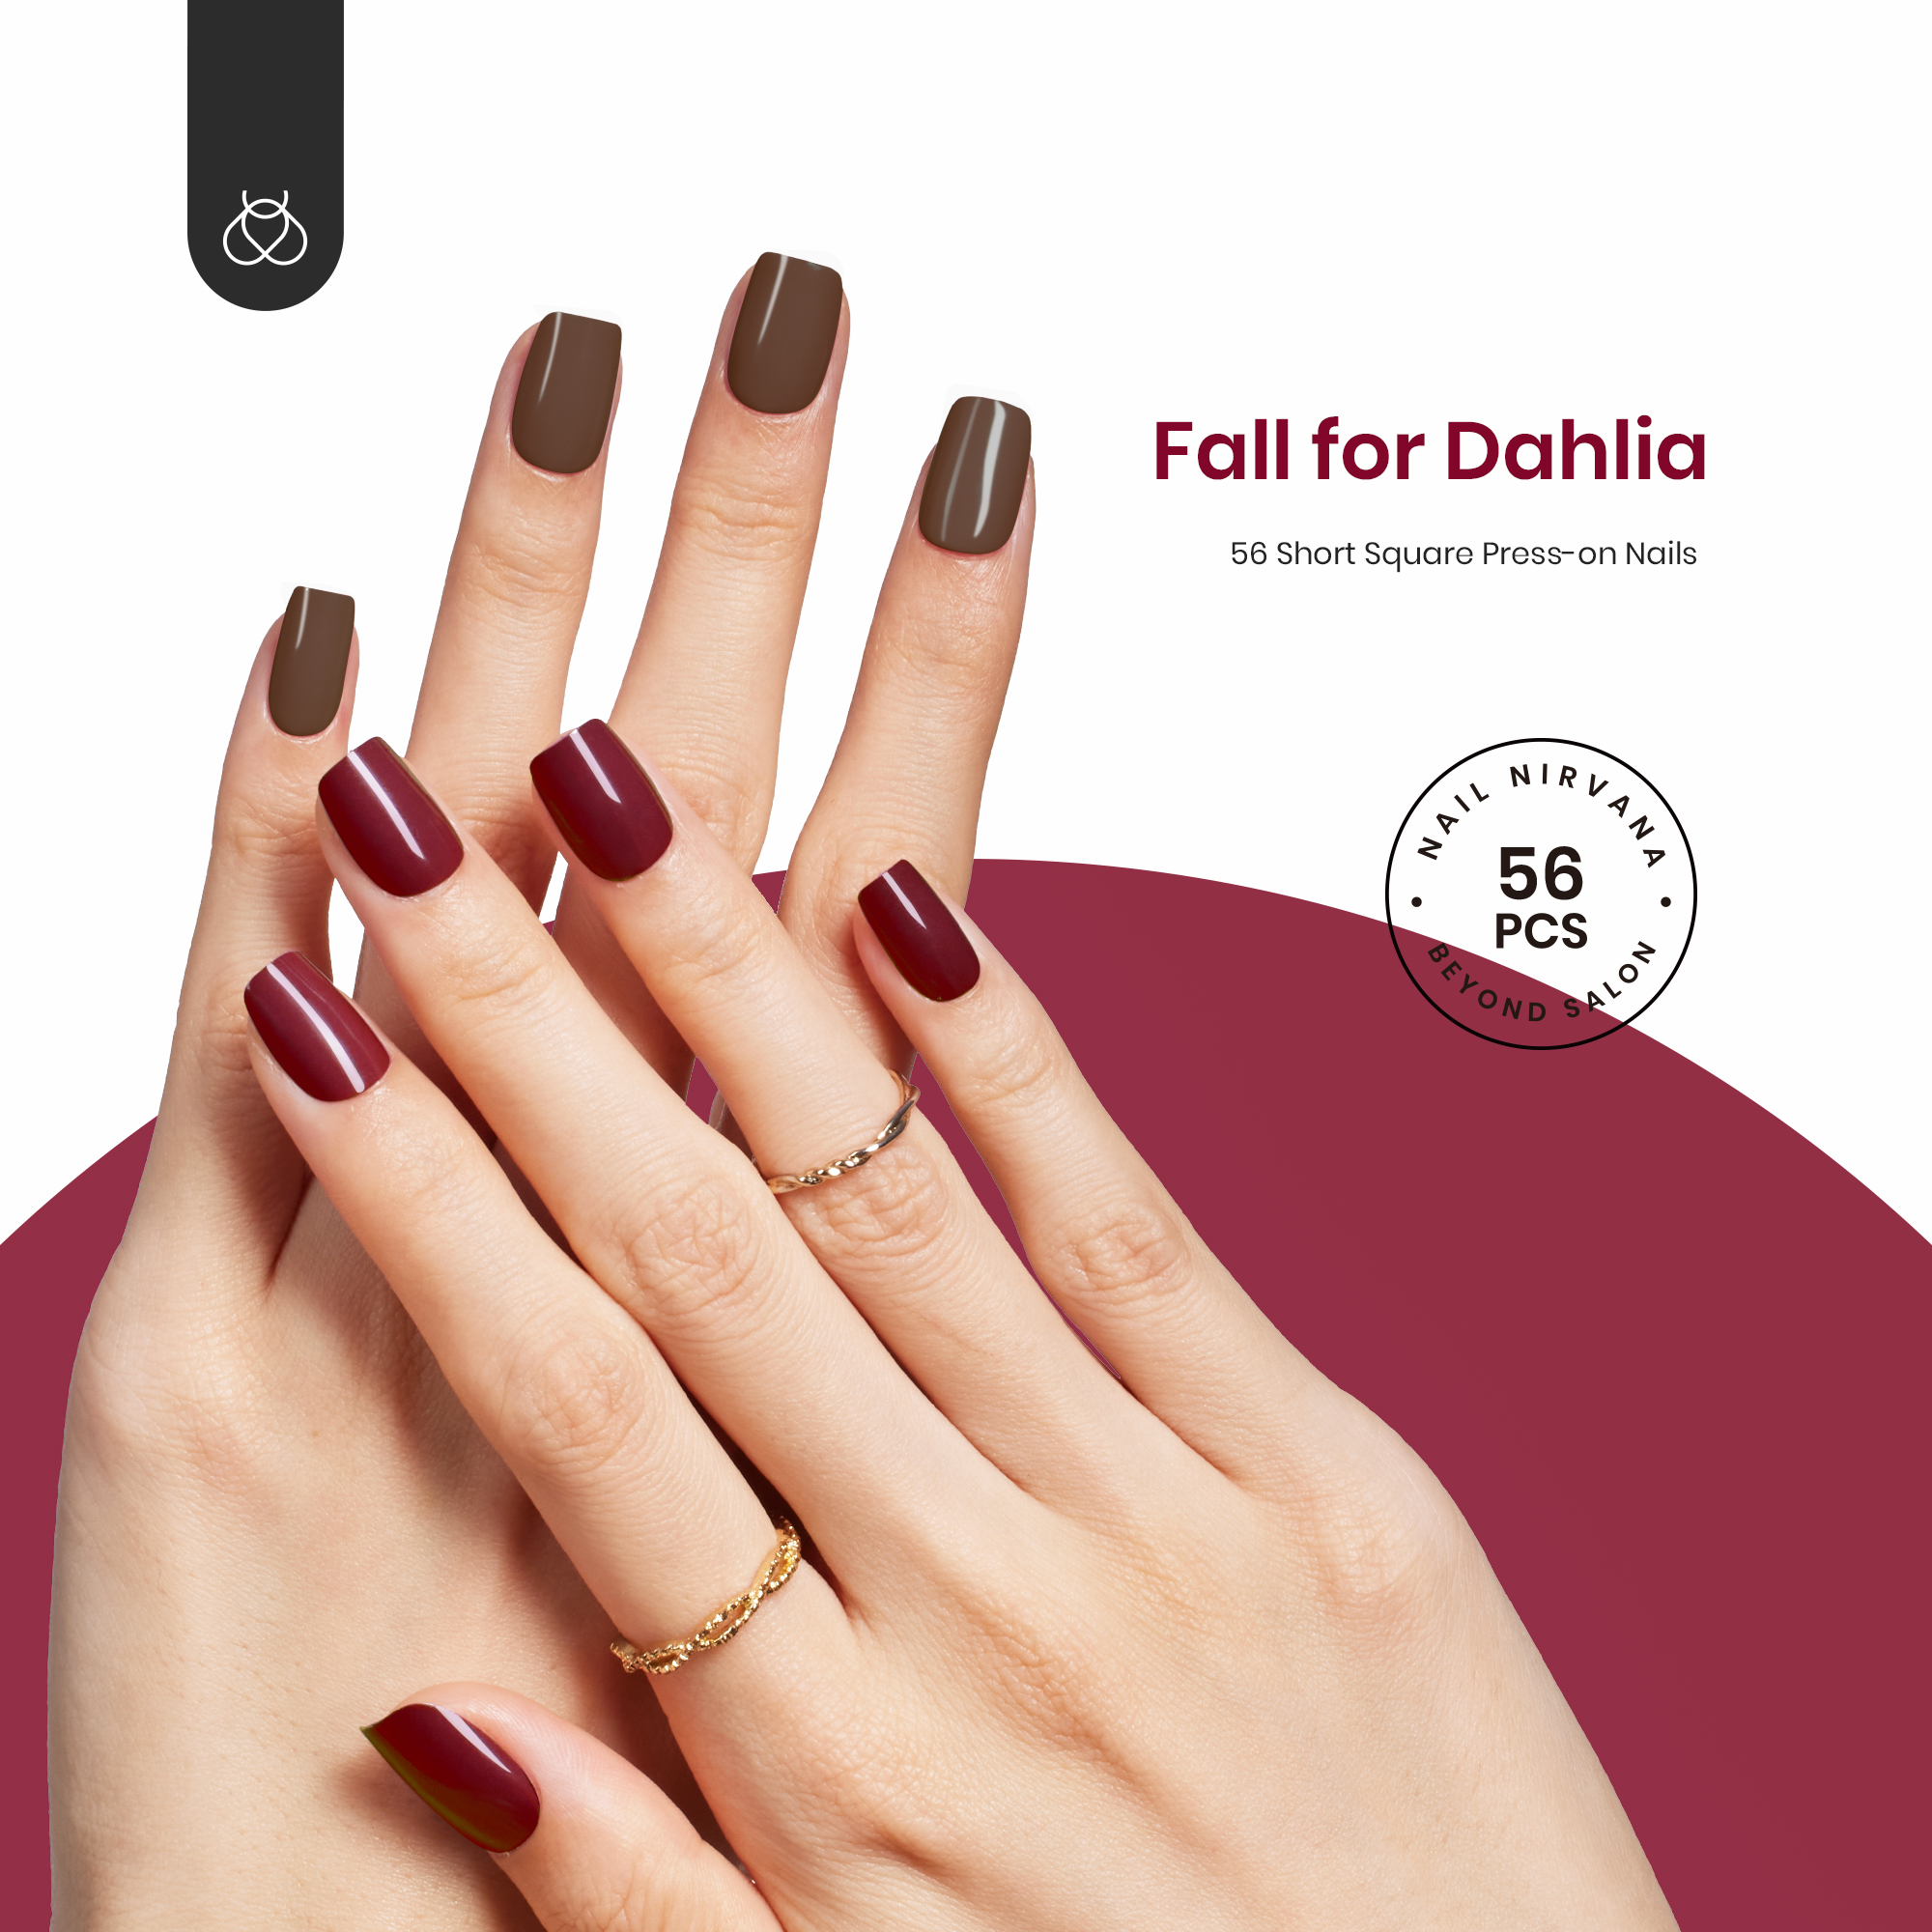 Fall for Dahlia - Press On Nails